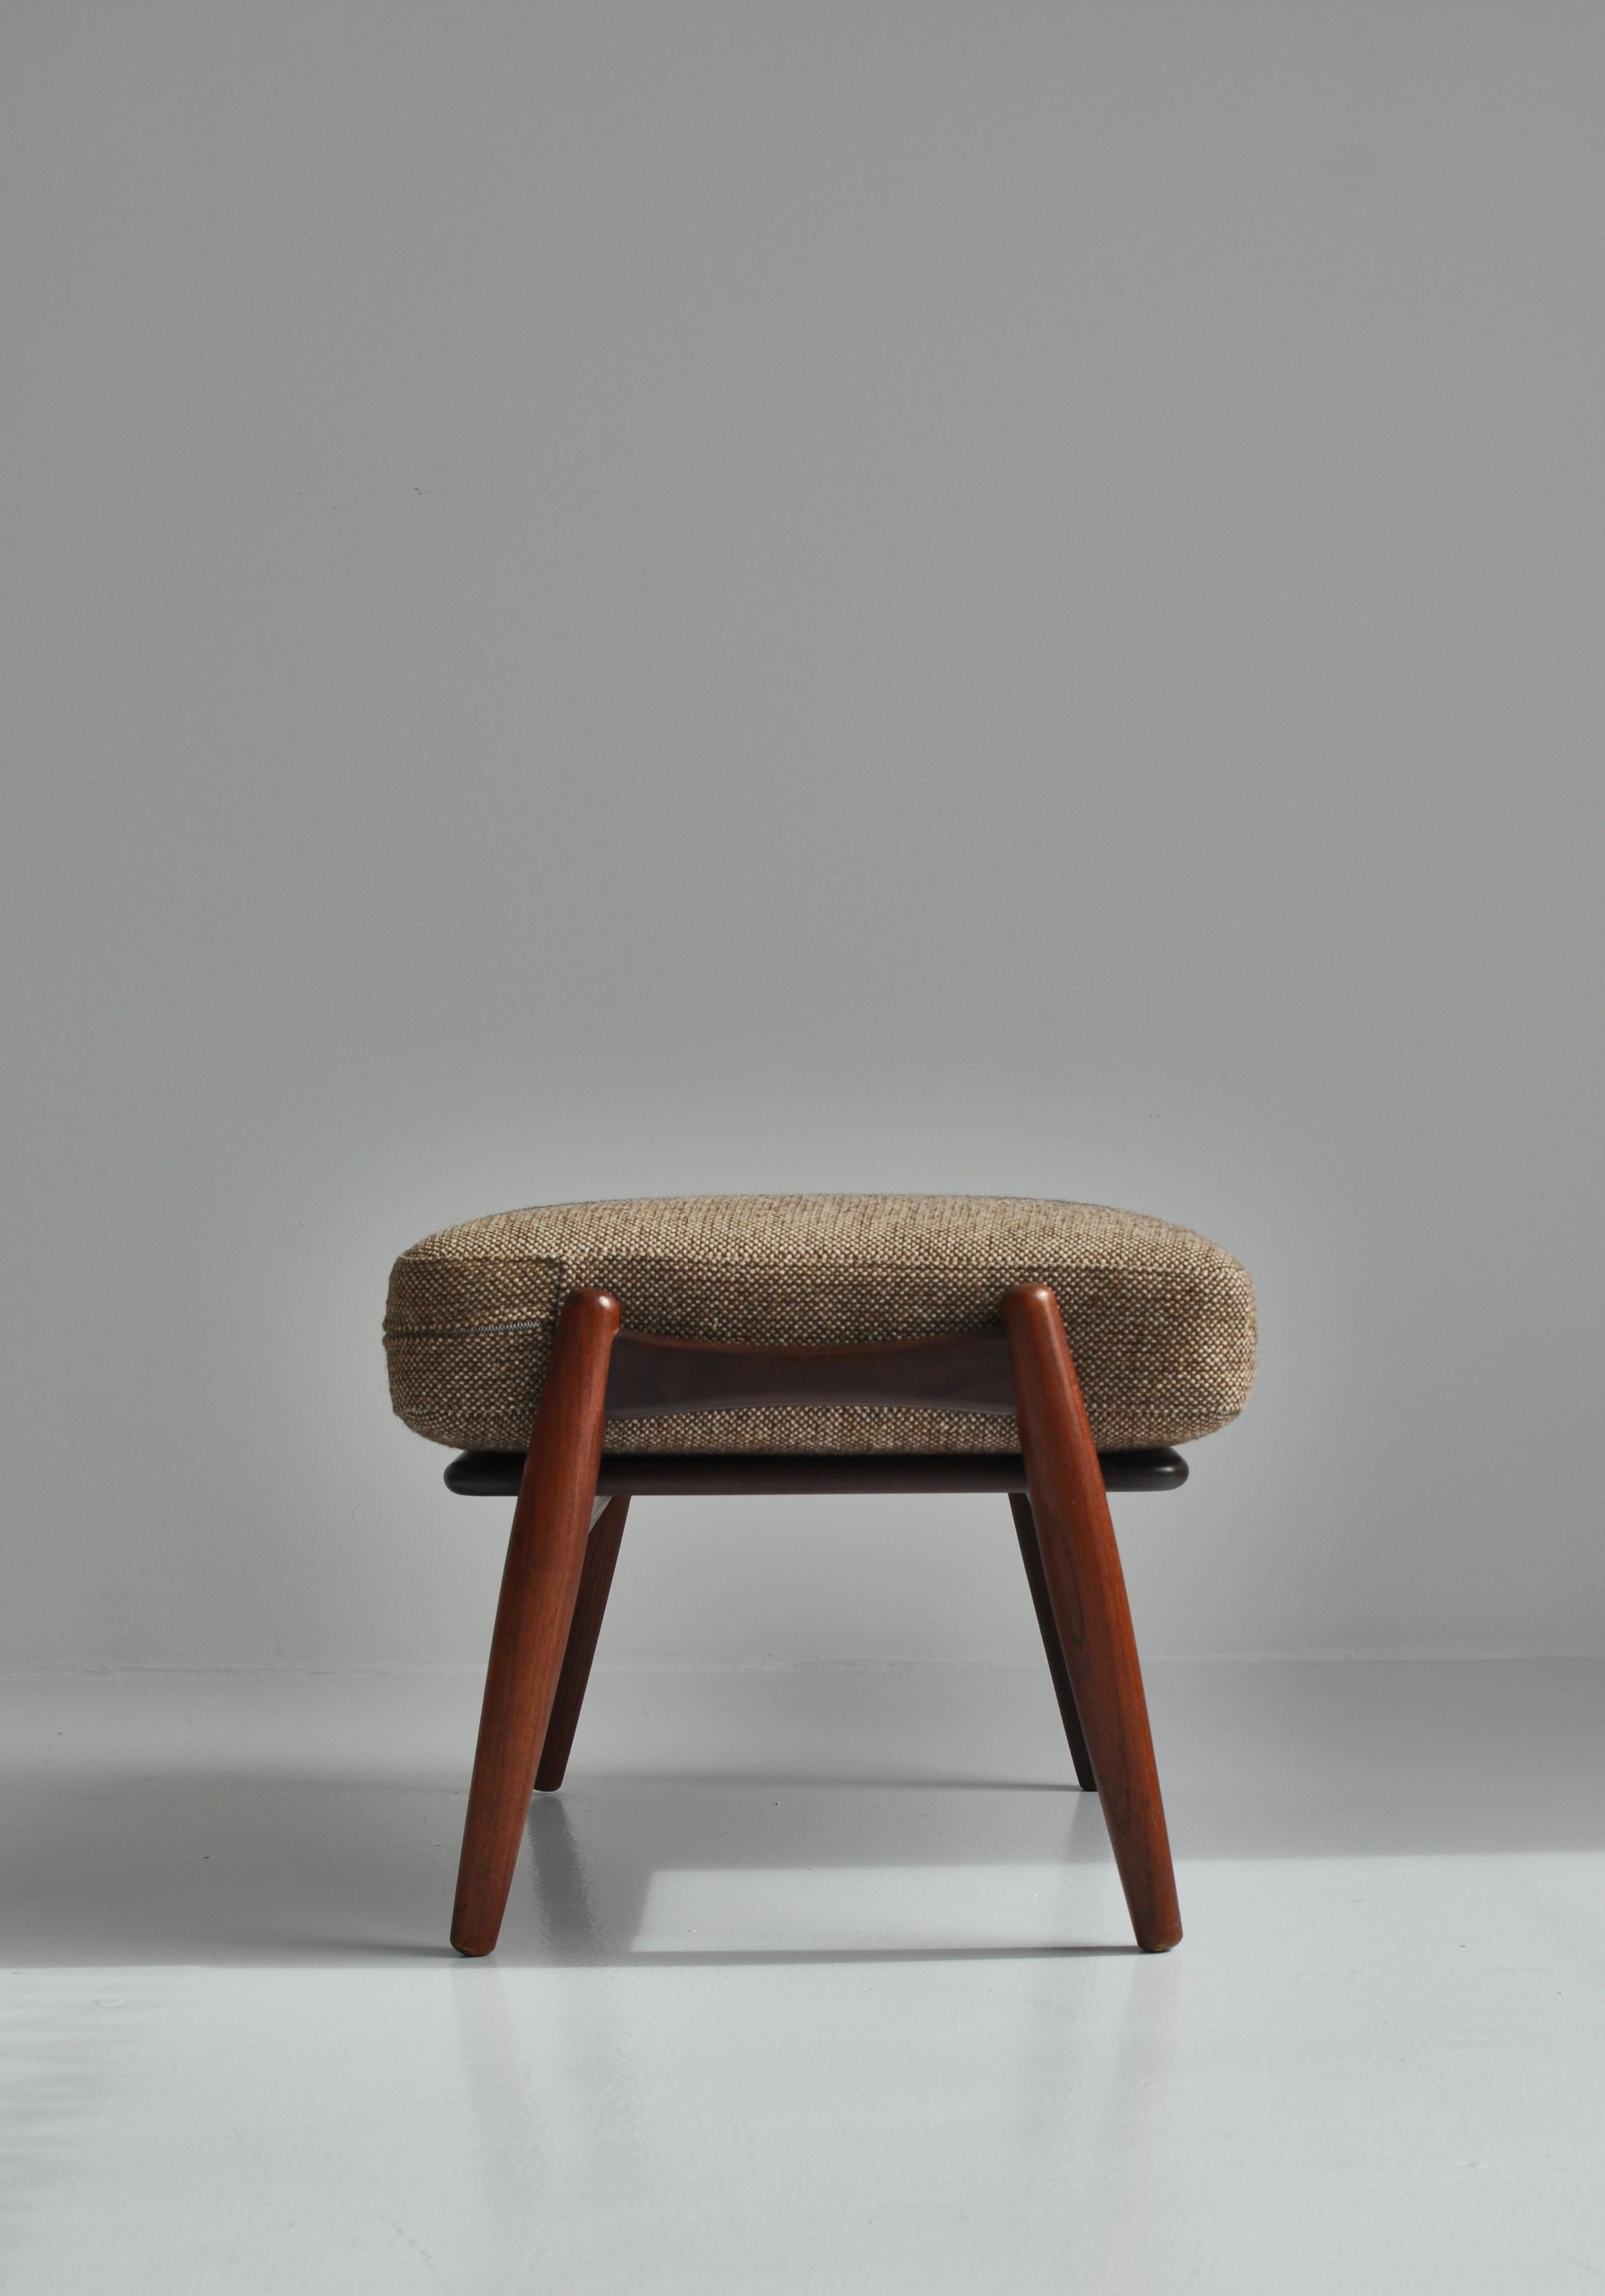 Rarely seen ottoman designed by Hans J. Wegner and produced by GETAMA in Gedsted, Denmark in the 1960s. The original sprung cushion has been reupholstered in Kvadrat wool. The ottoman is stamped by the maker under the seat. Great condition.